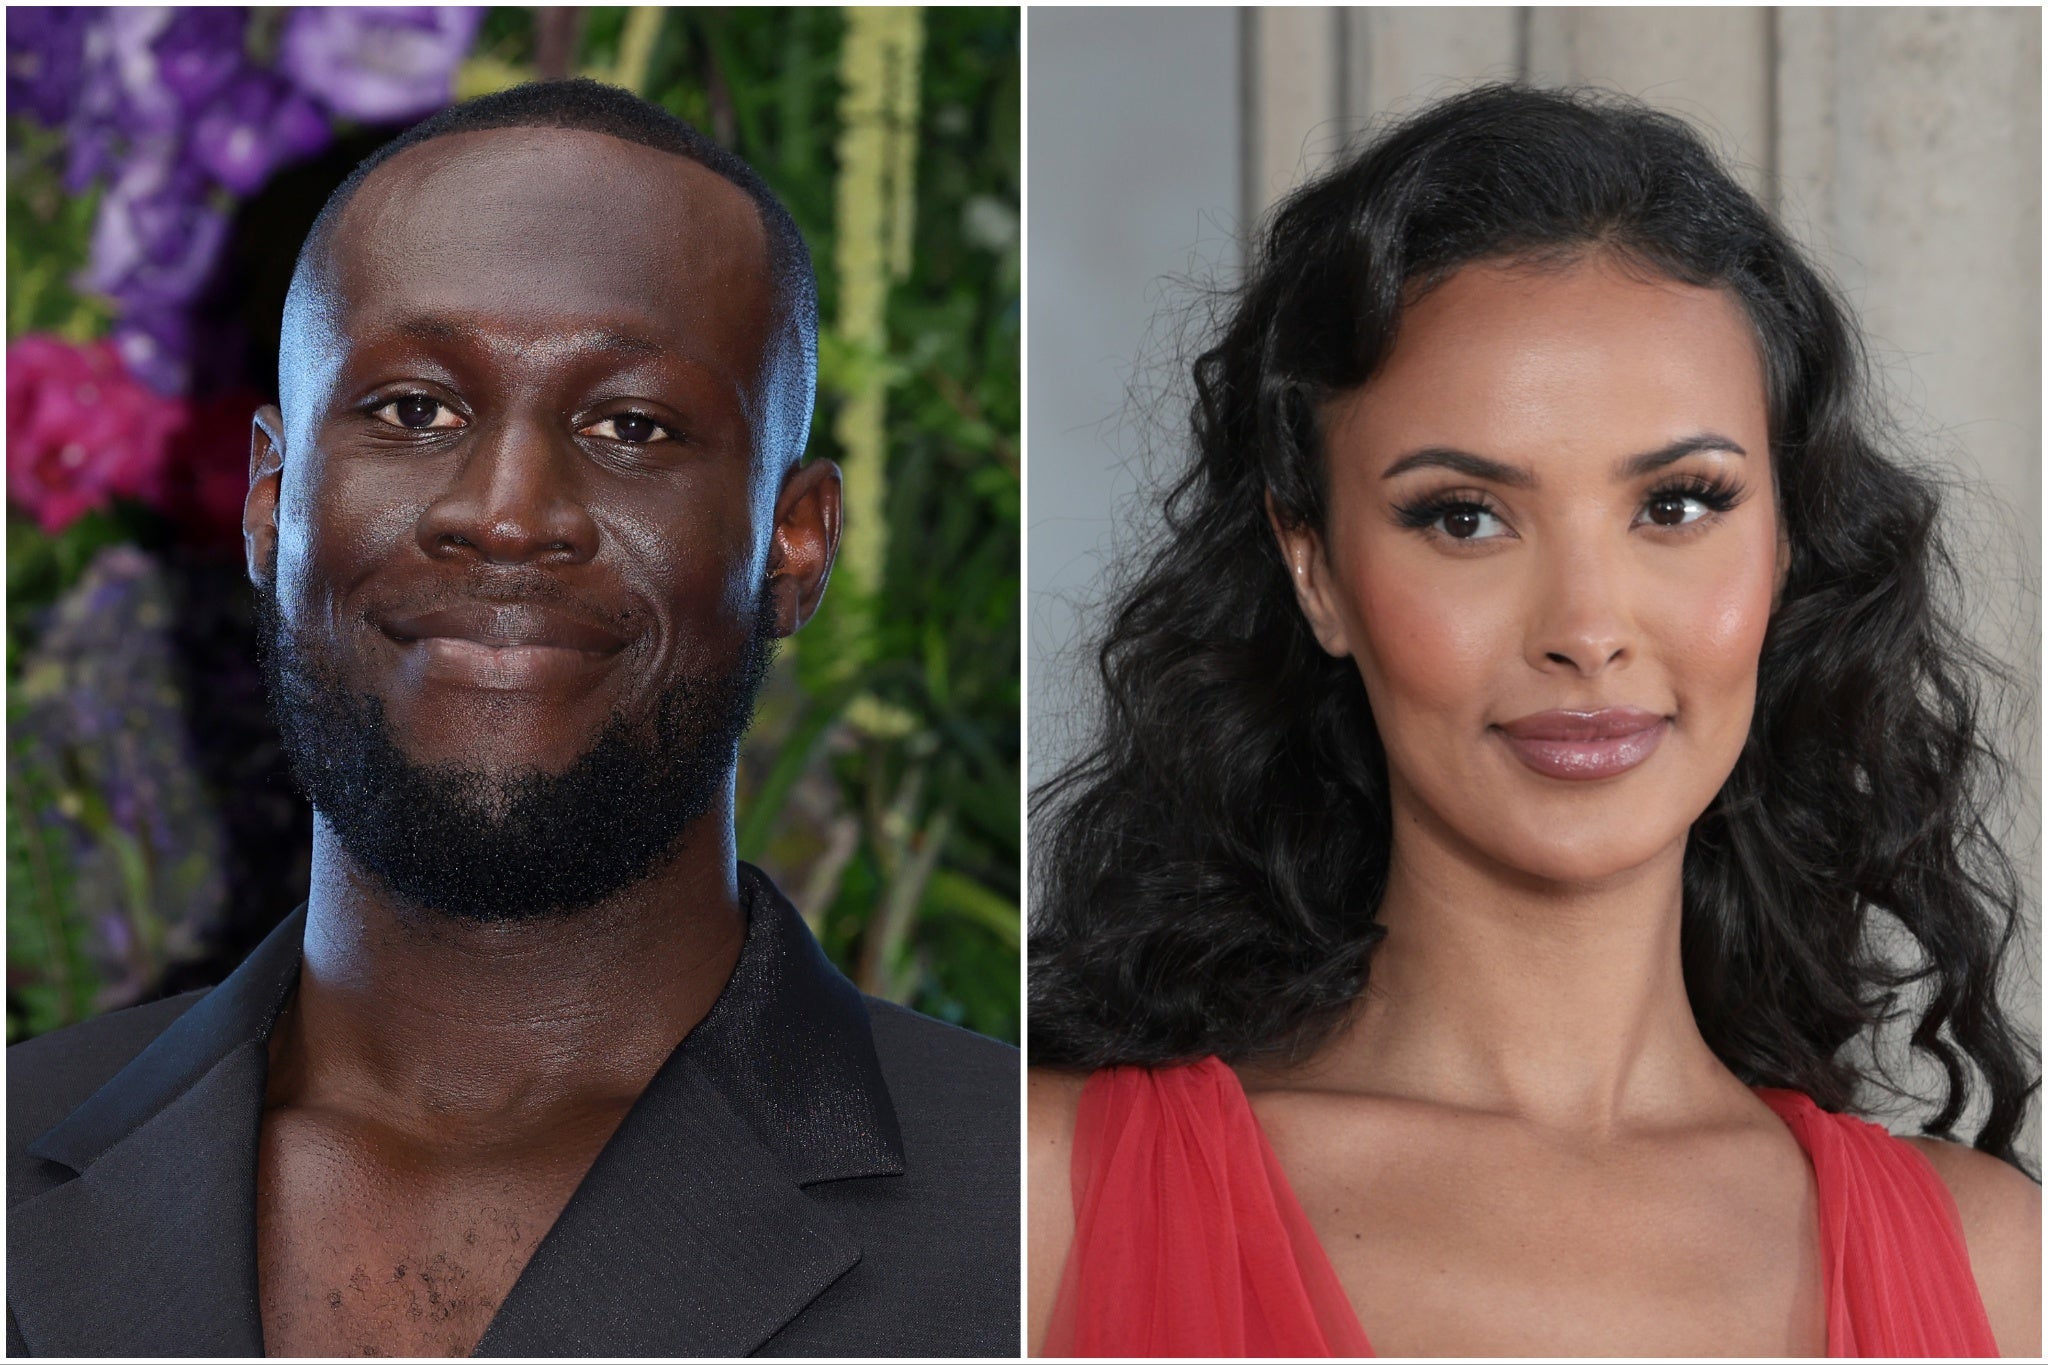 Maya Jama officially confirmed her relationship with Stormzy relationship was back on track in October